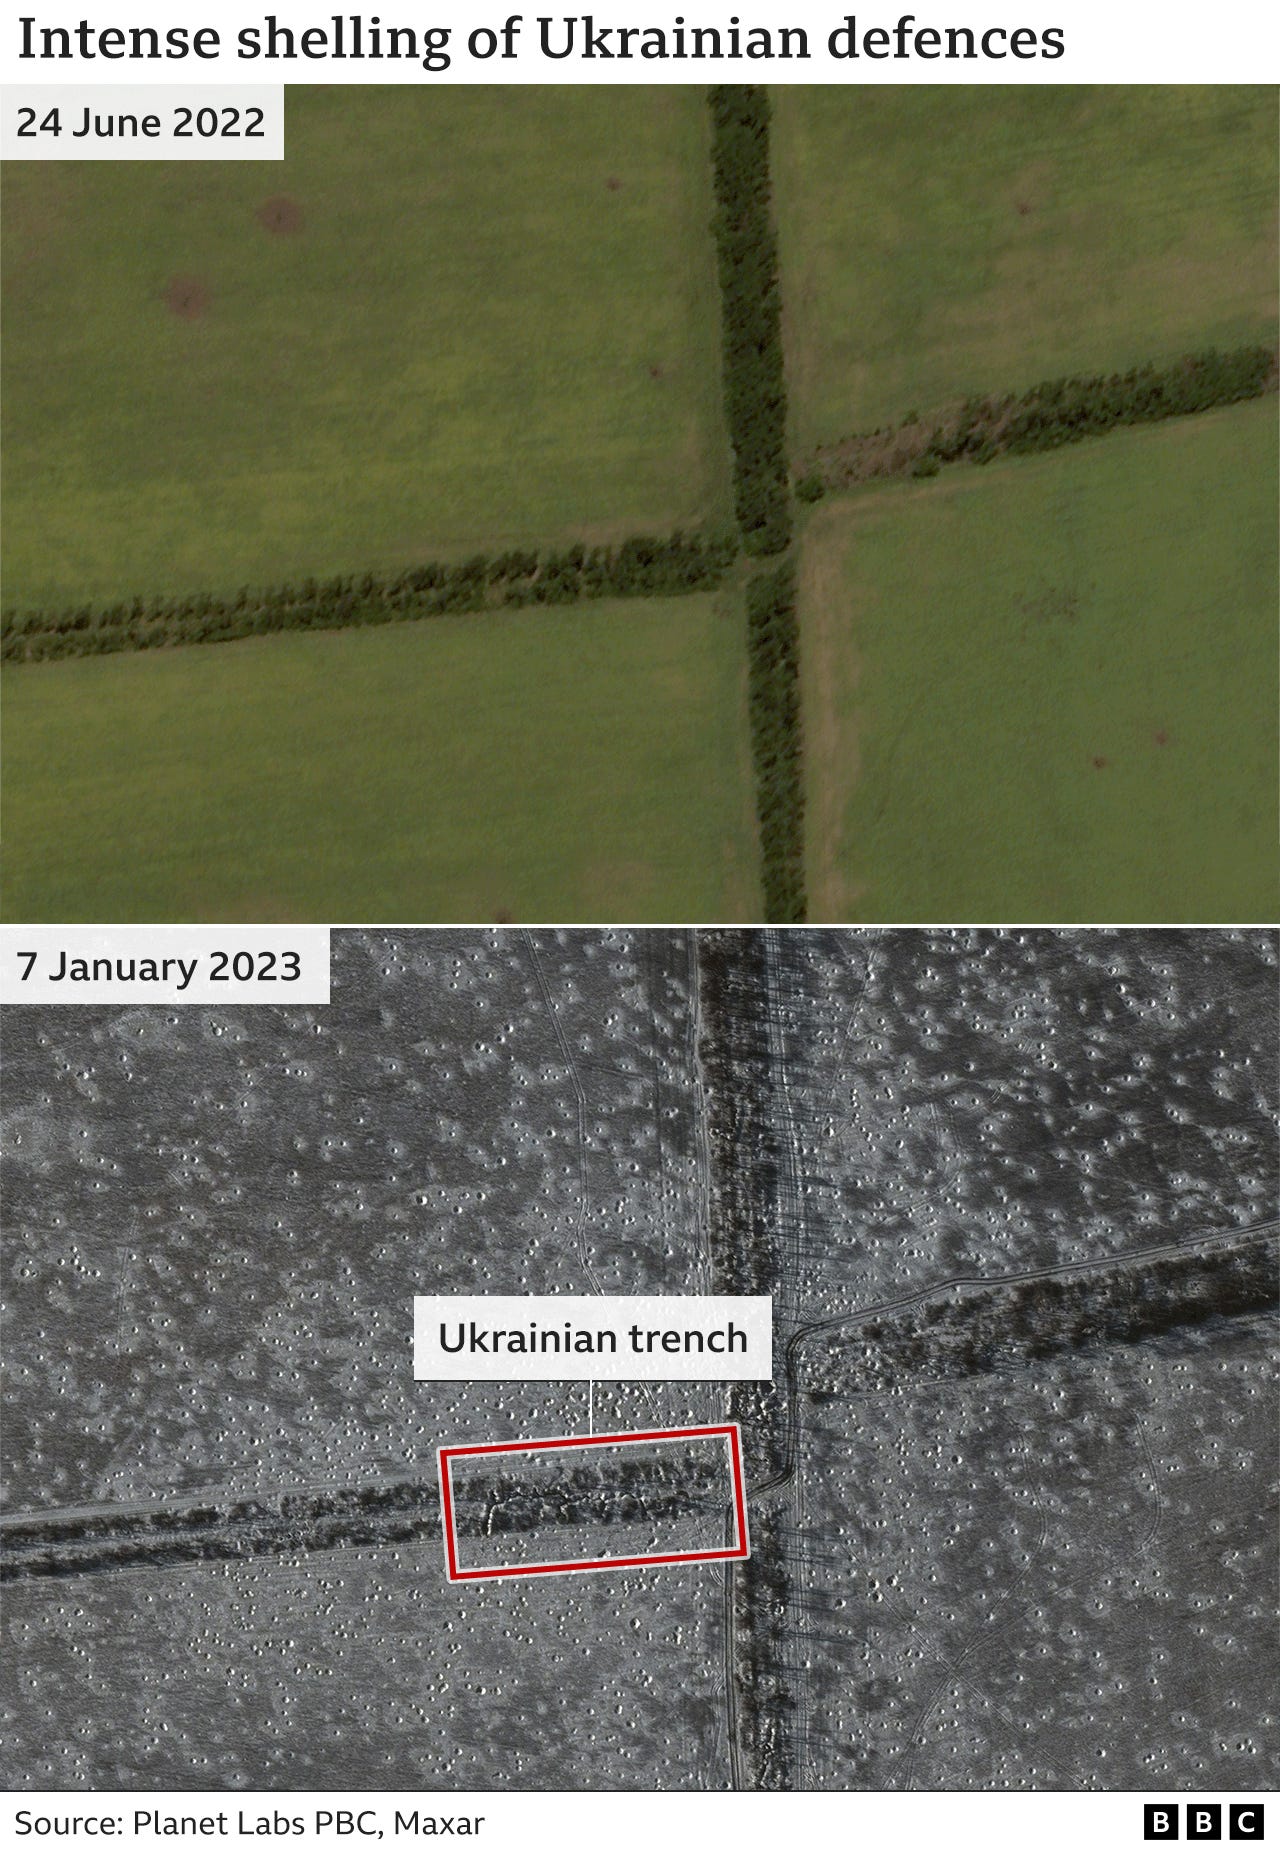 Before and after images showing craters after intense shelling of a Ukrainian trench